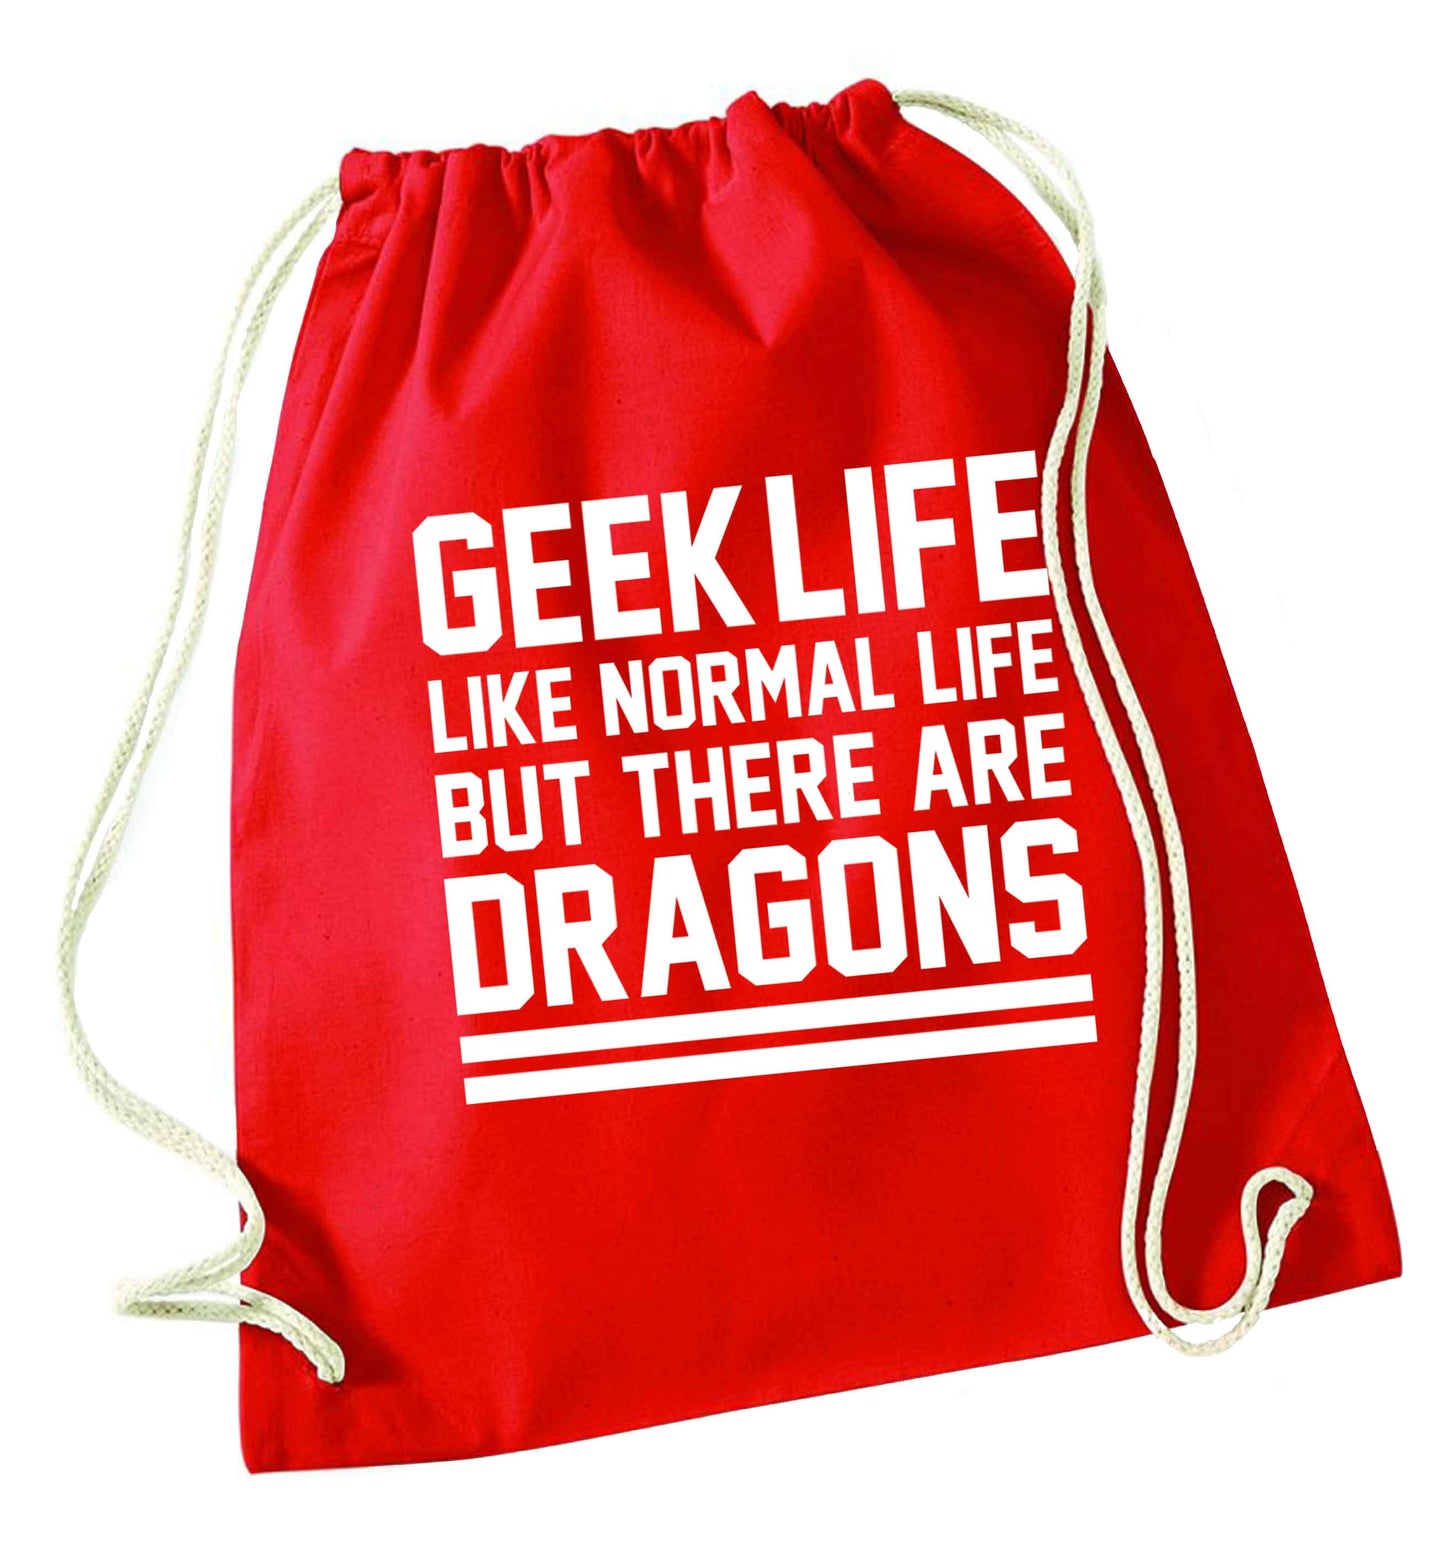 Geek life like normal life but there are dragons red drawstring bag 